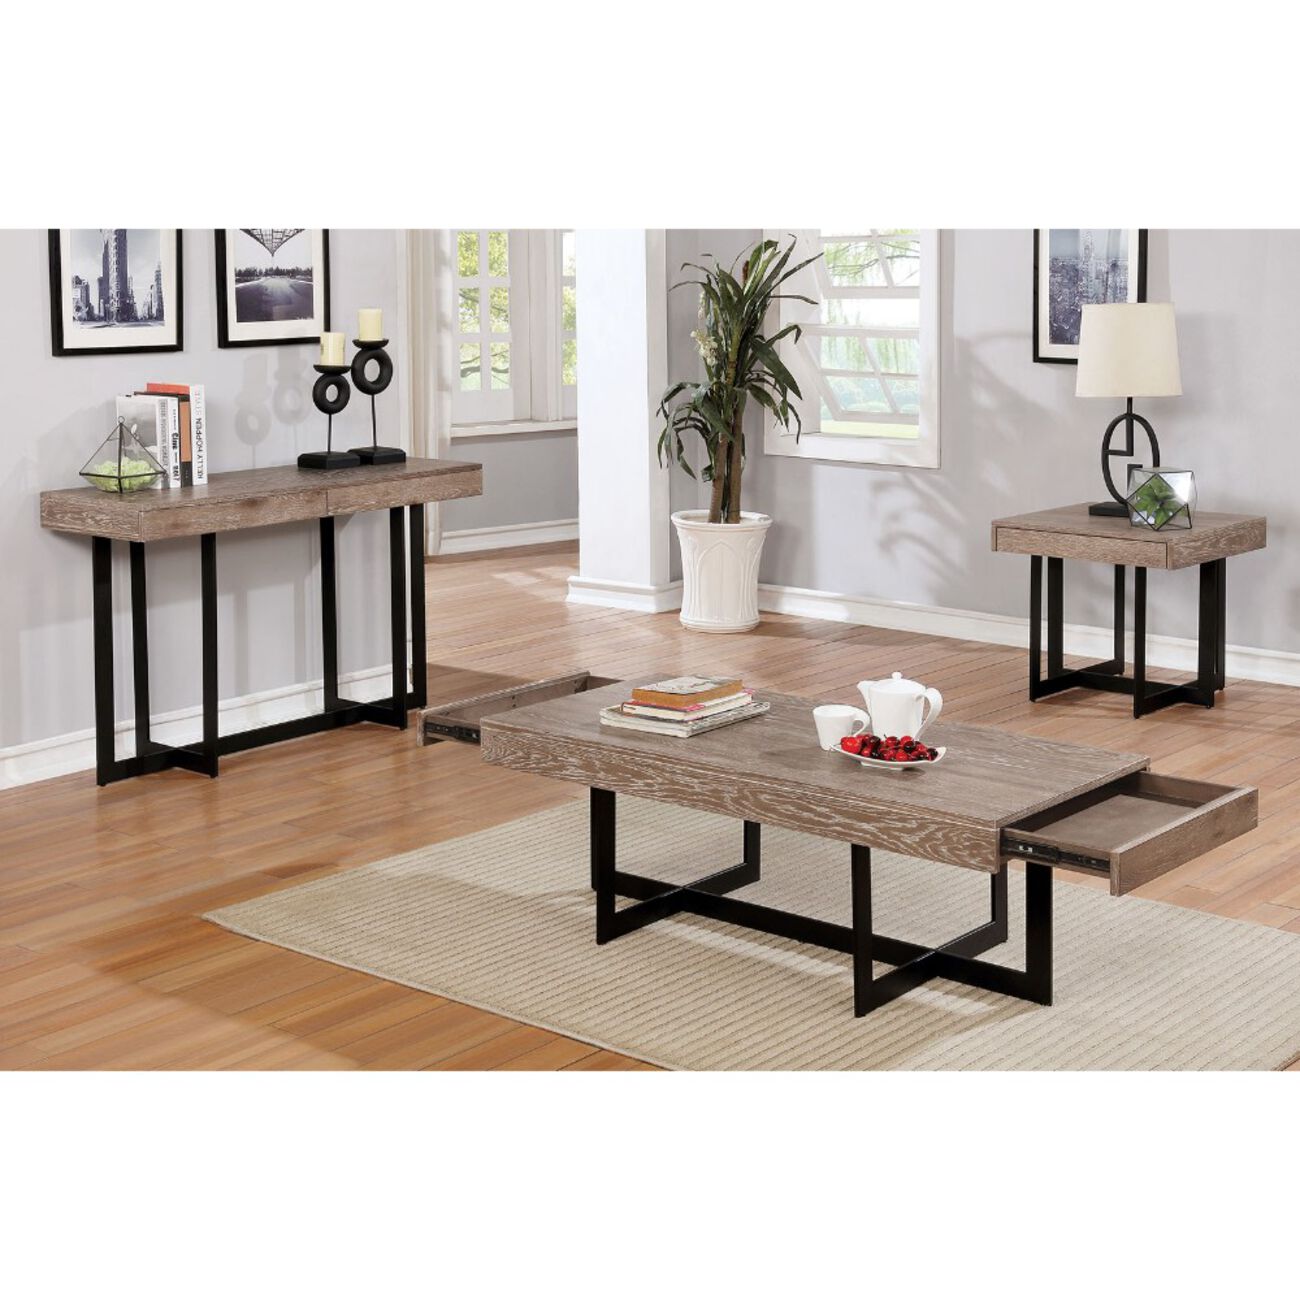 Solid Wood Coffee Table with Two Side Drawer and Metal Base, Brown and Black